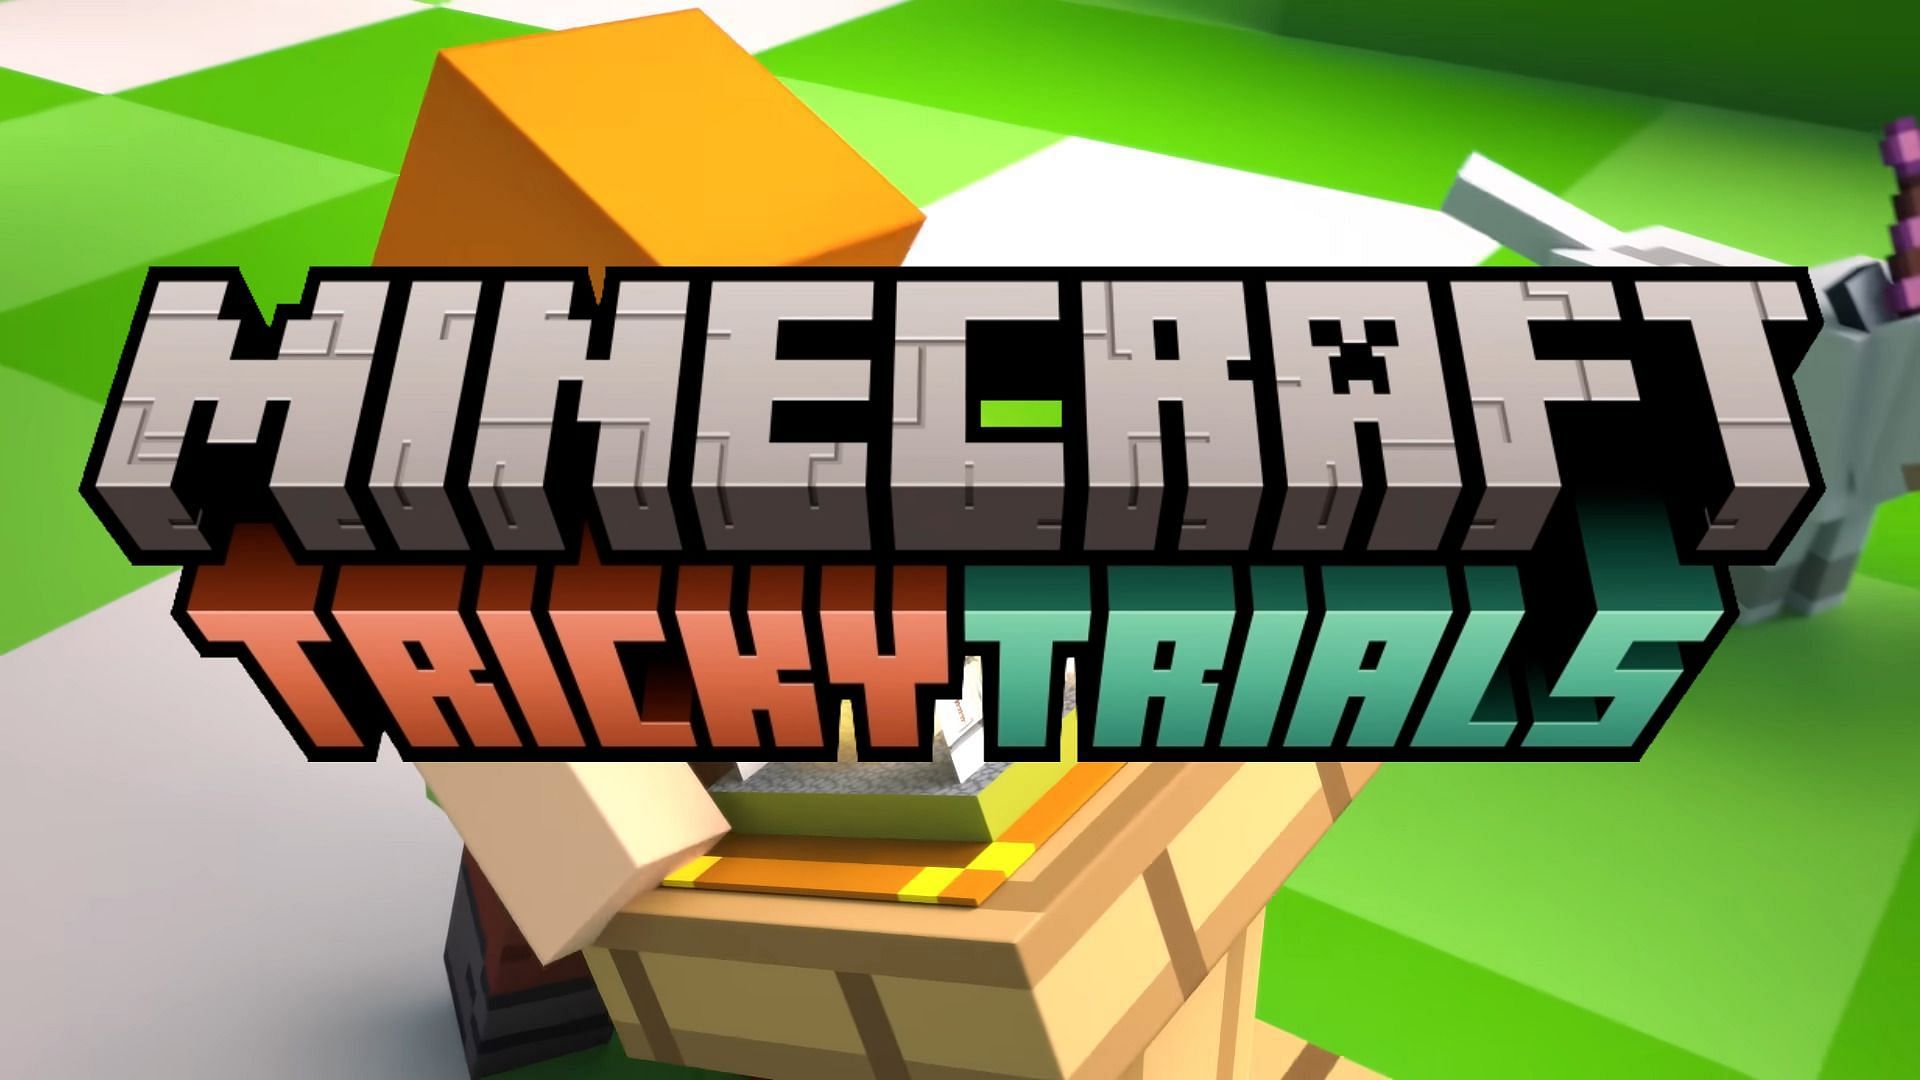 Minecraft may announce Tricky Trials release date as part of 15th anniversary celebration